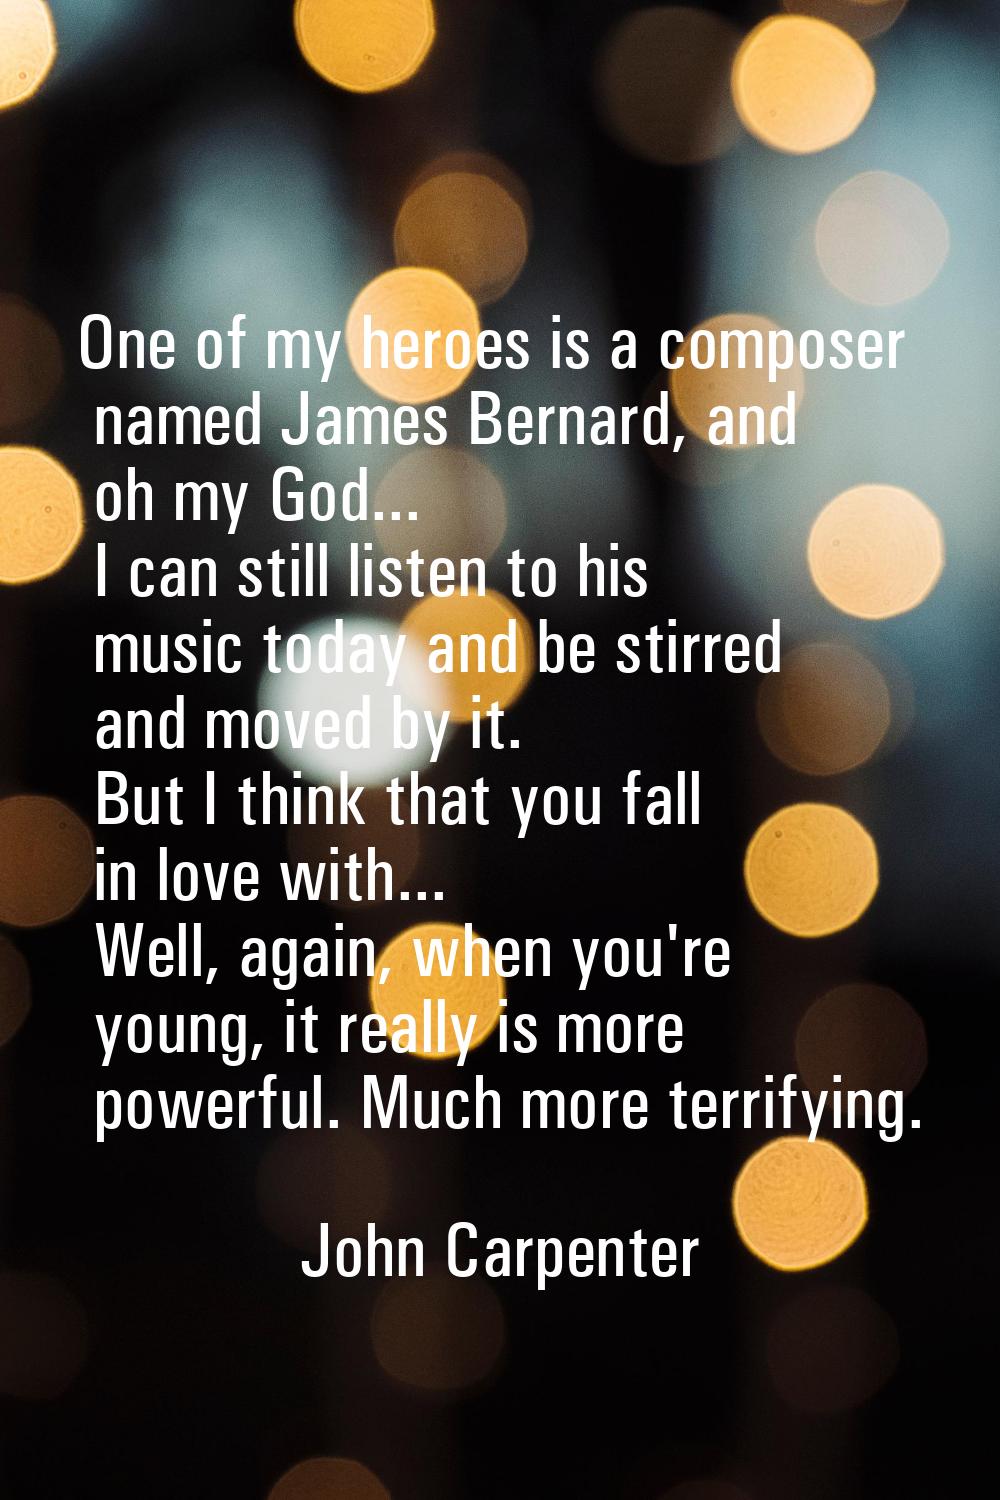 One of my heroes is a composer named James Bernard, and oh my God... I can still listen to his musi